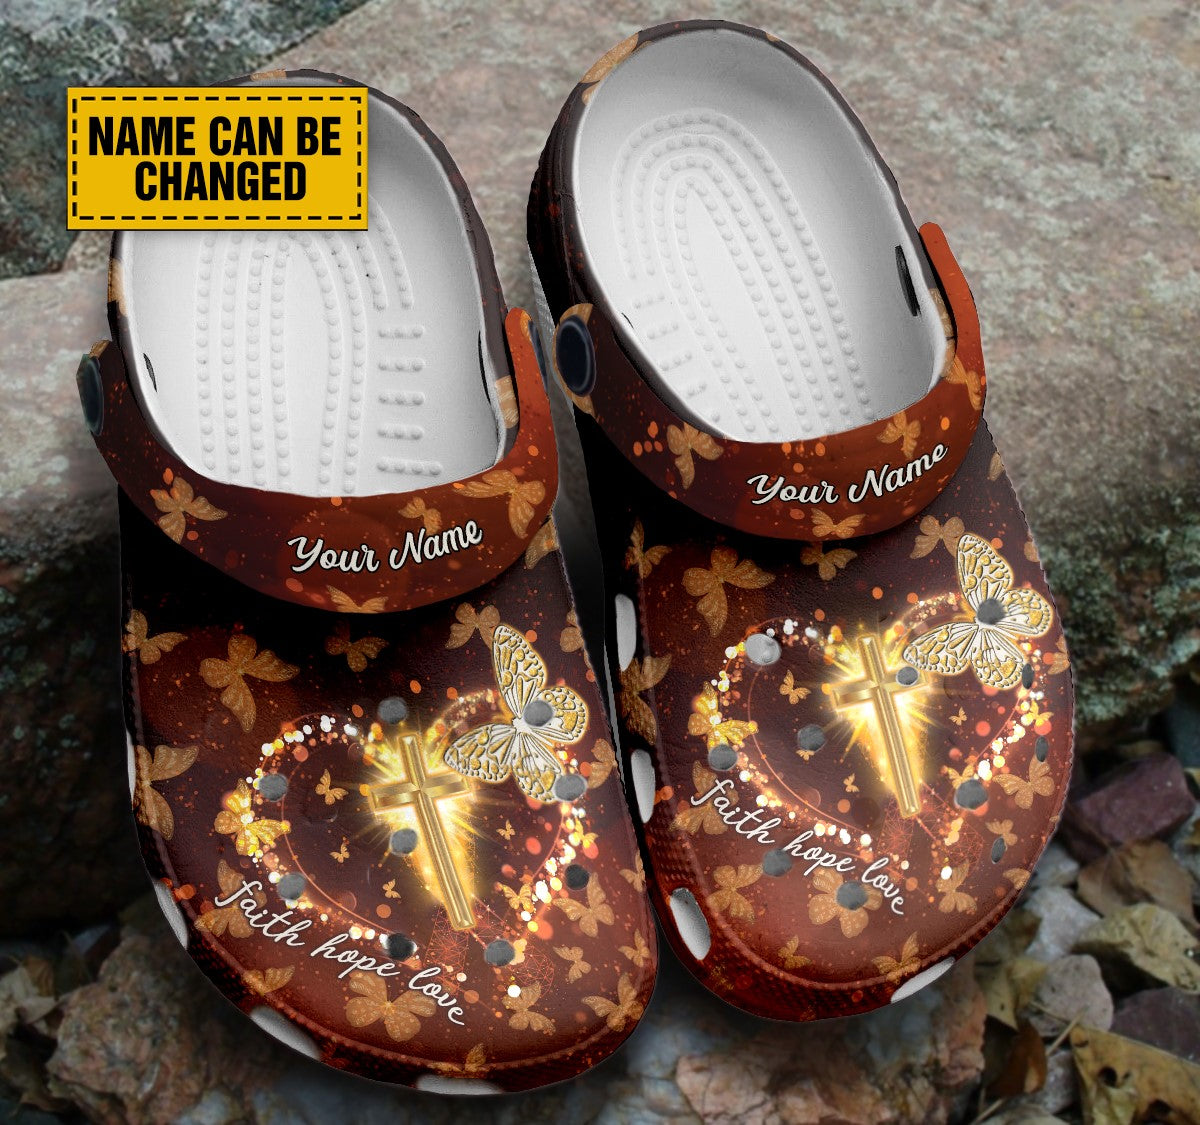 Teesdily | Faith Hope Love Customized Clogs Shoes, Gift For Jesus Lovers, God Faith Believers, Christian Gifts, Kid & Adult Unisex Clogs Shoes Eva